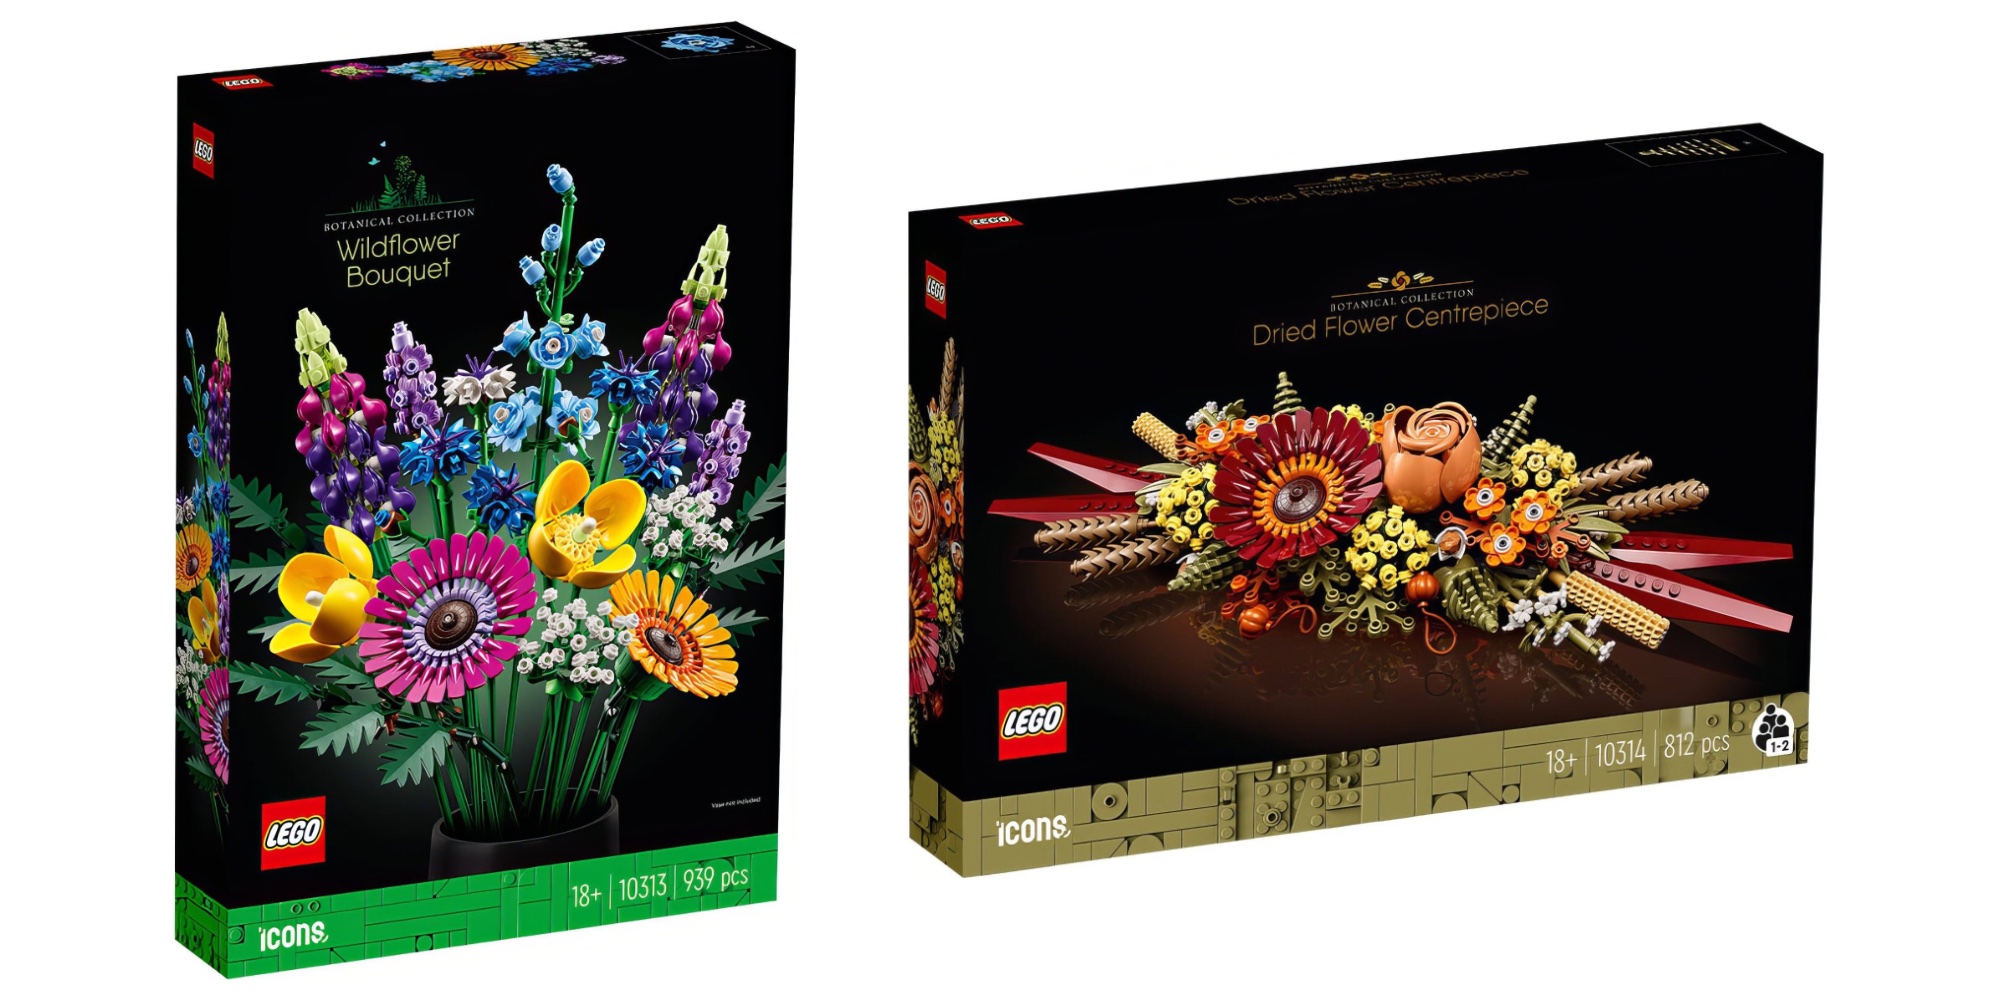 LEGO Botanical Collection 10314 Dried Flower Centerpiece, 54% OFF